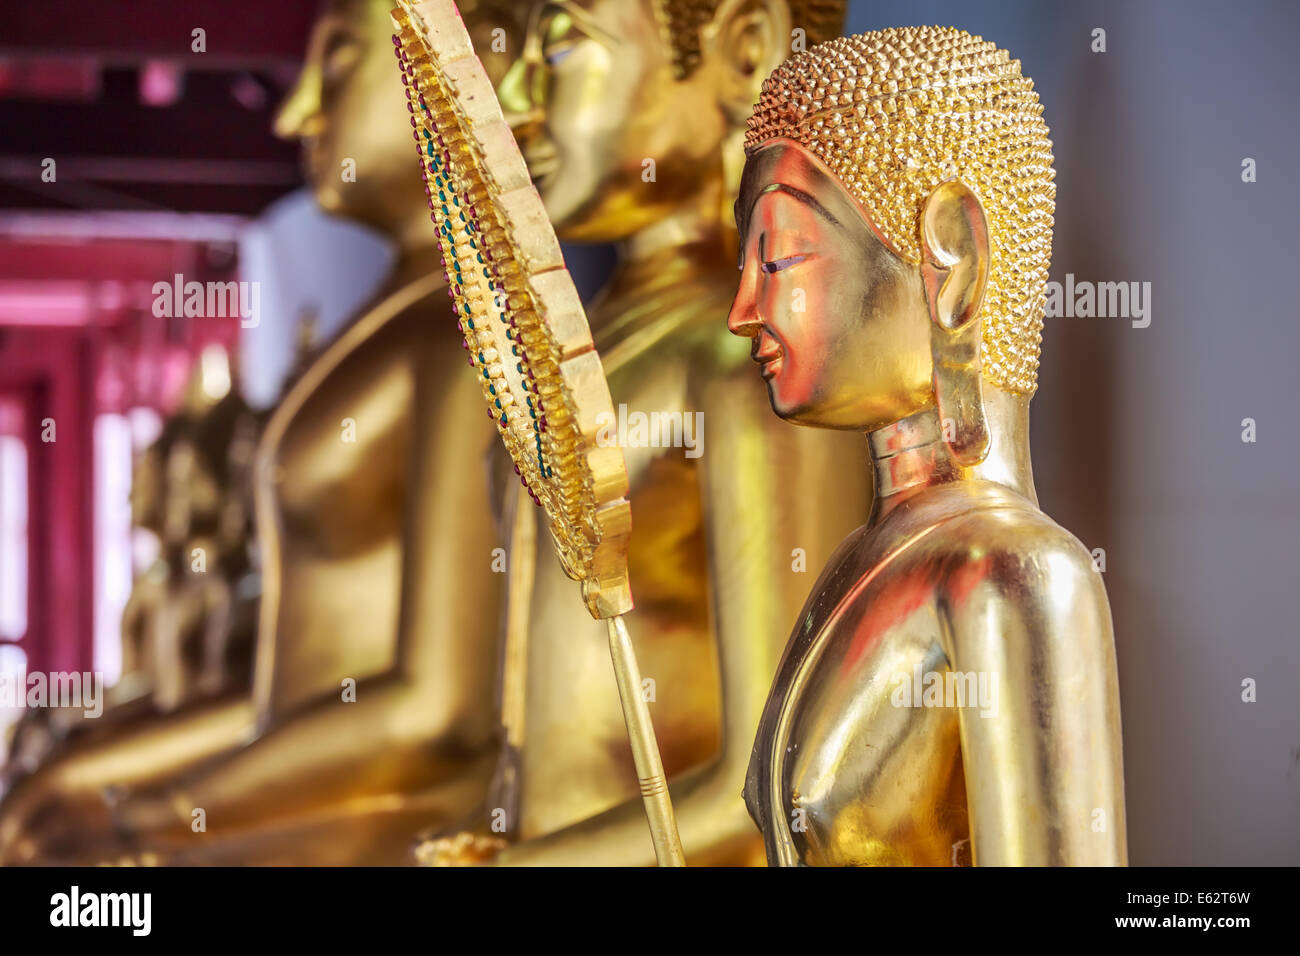 Golden buddha's image in a Thai temple Stock Photo